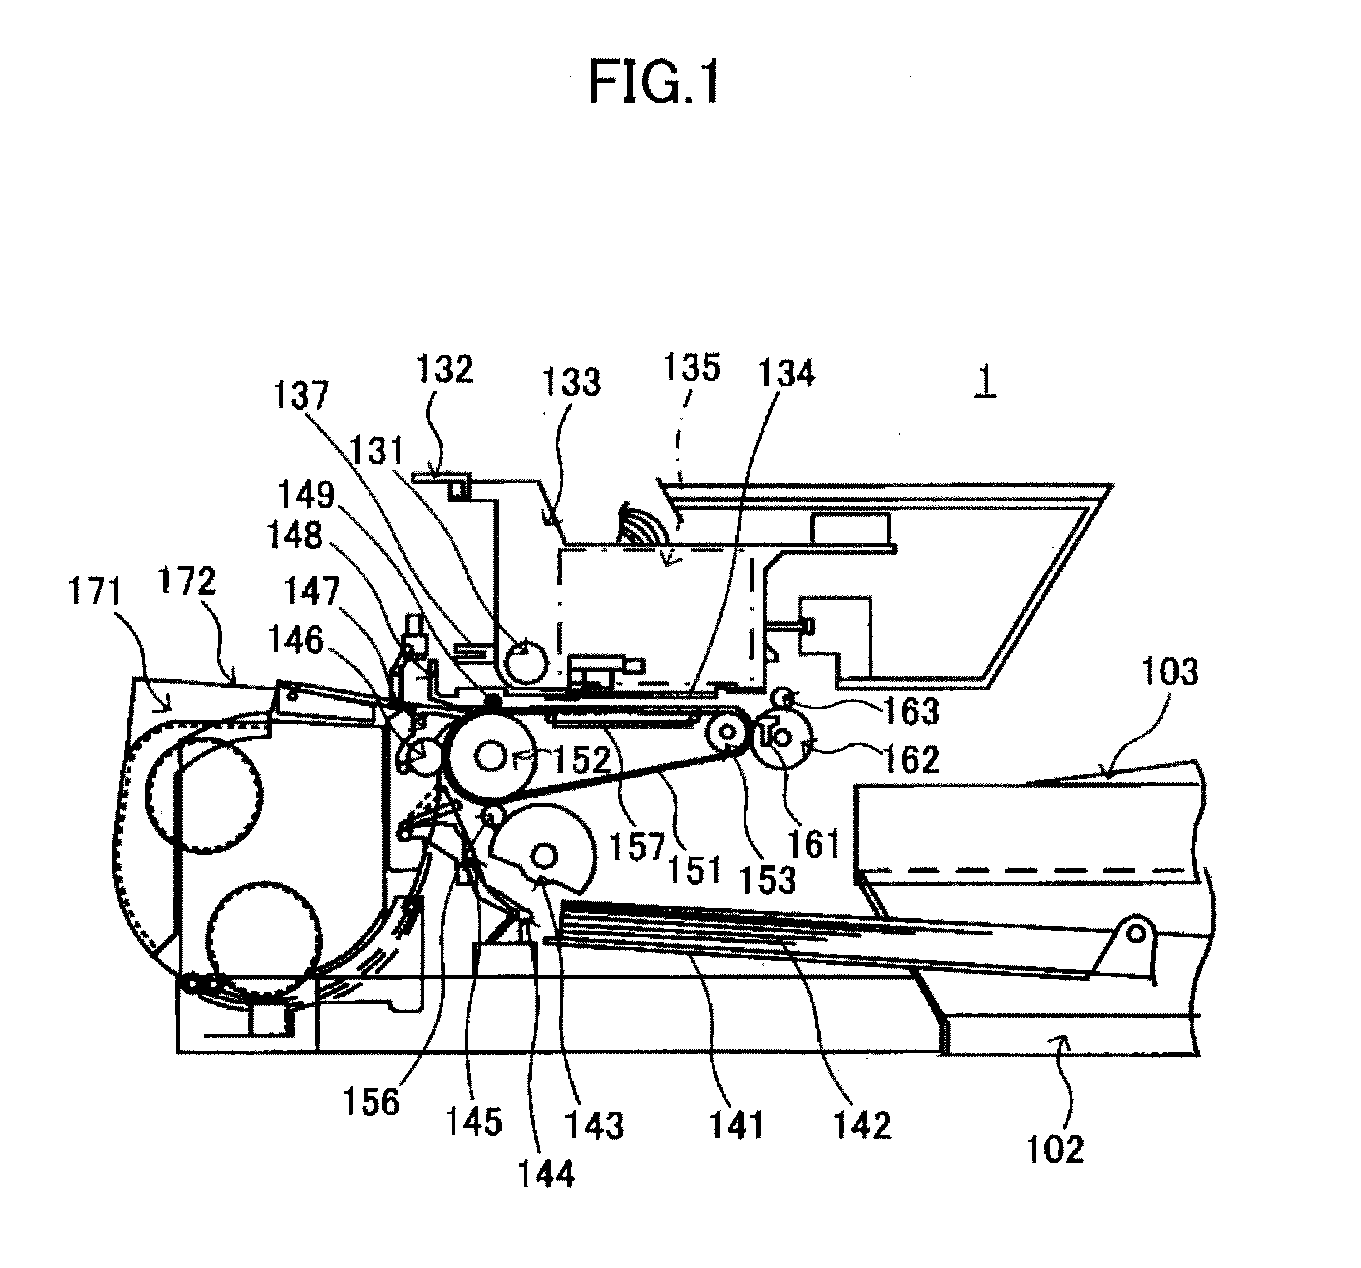 Liquid drop ejecting head, image forming device, and method of manufacturing liquid drop ejecting head